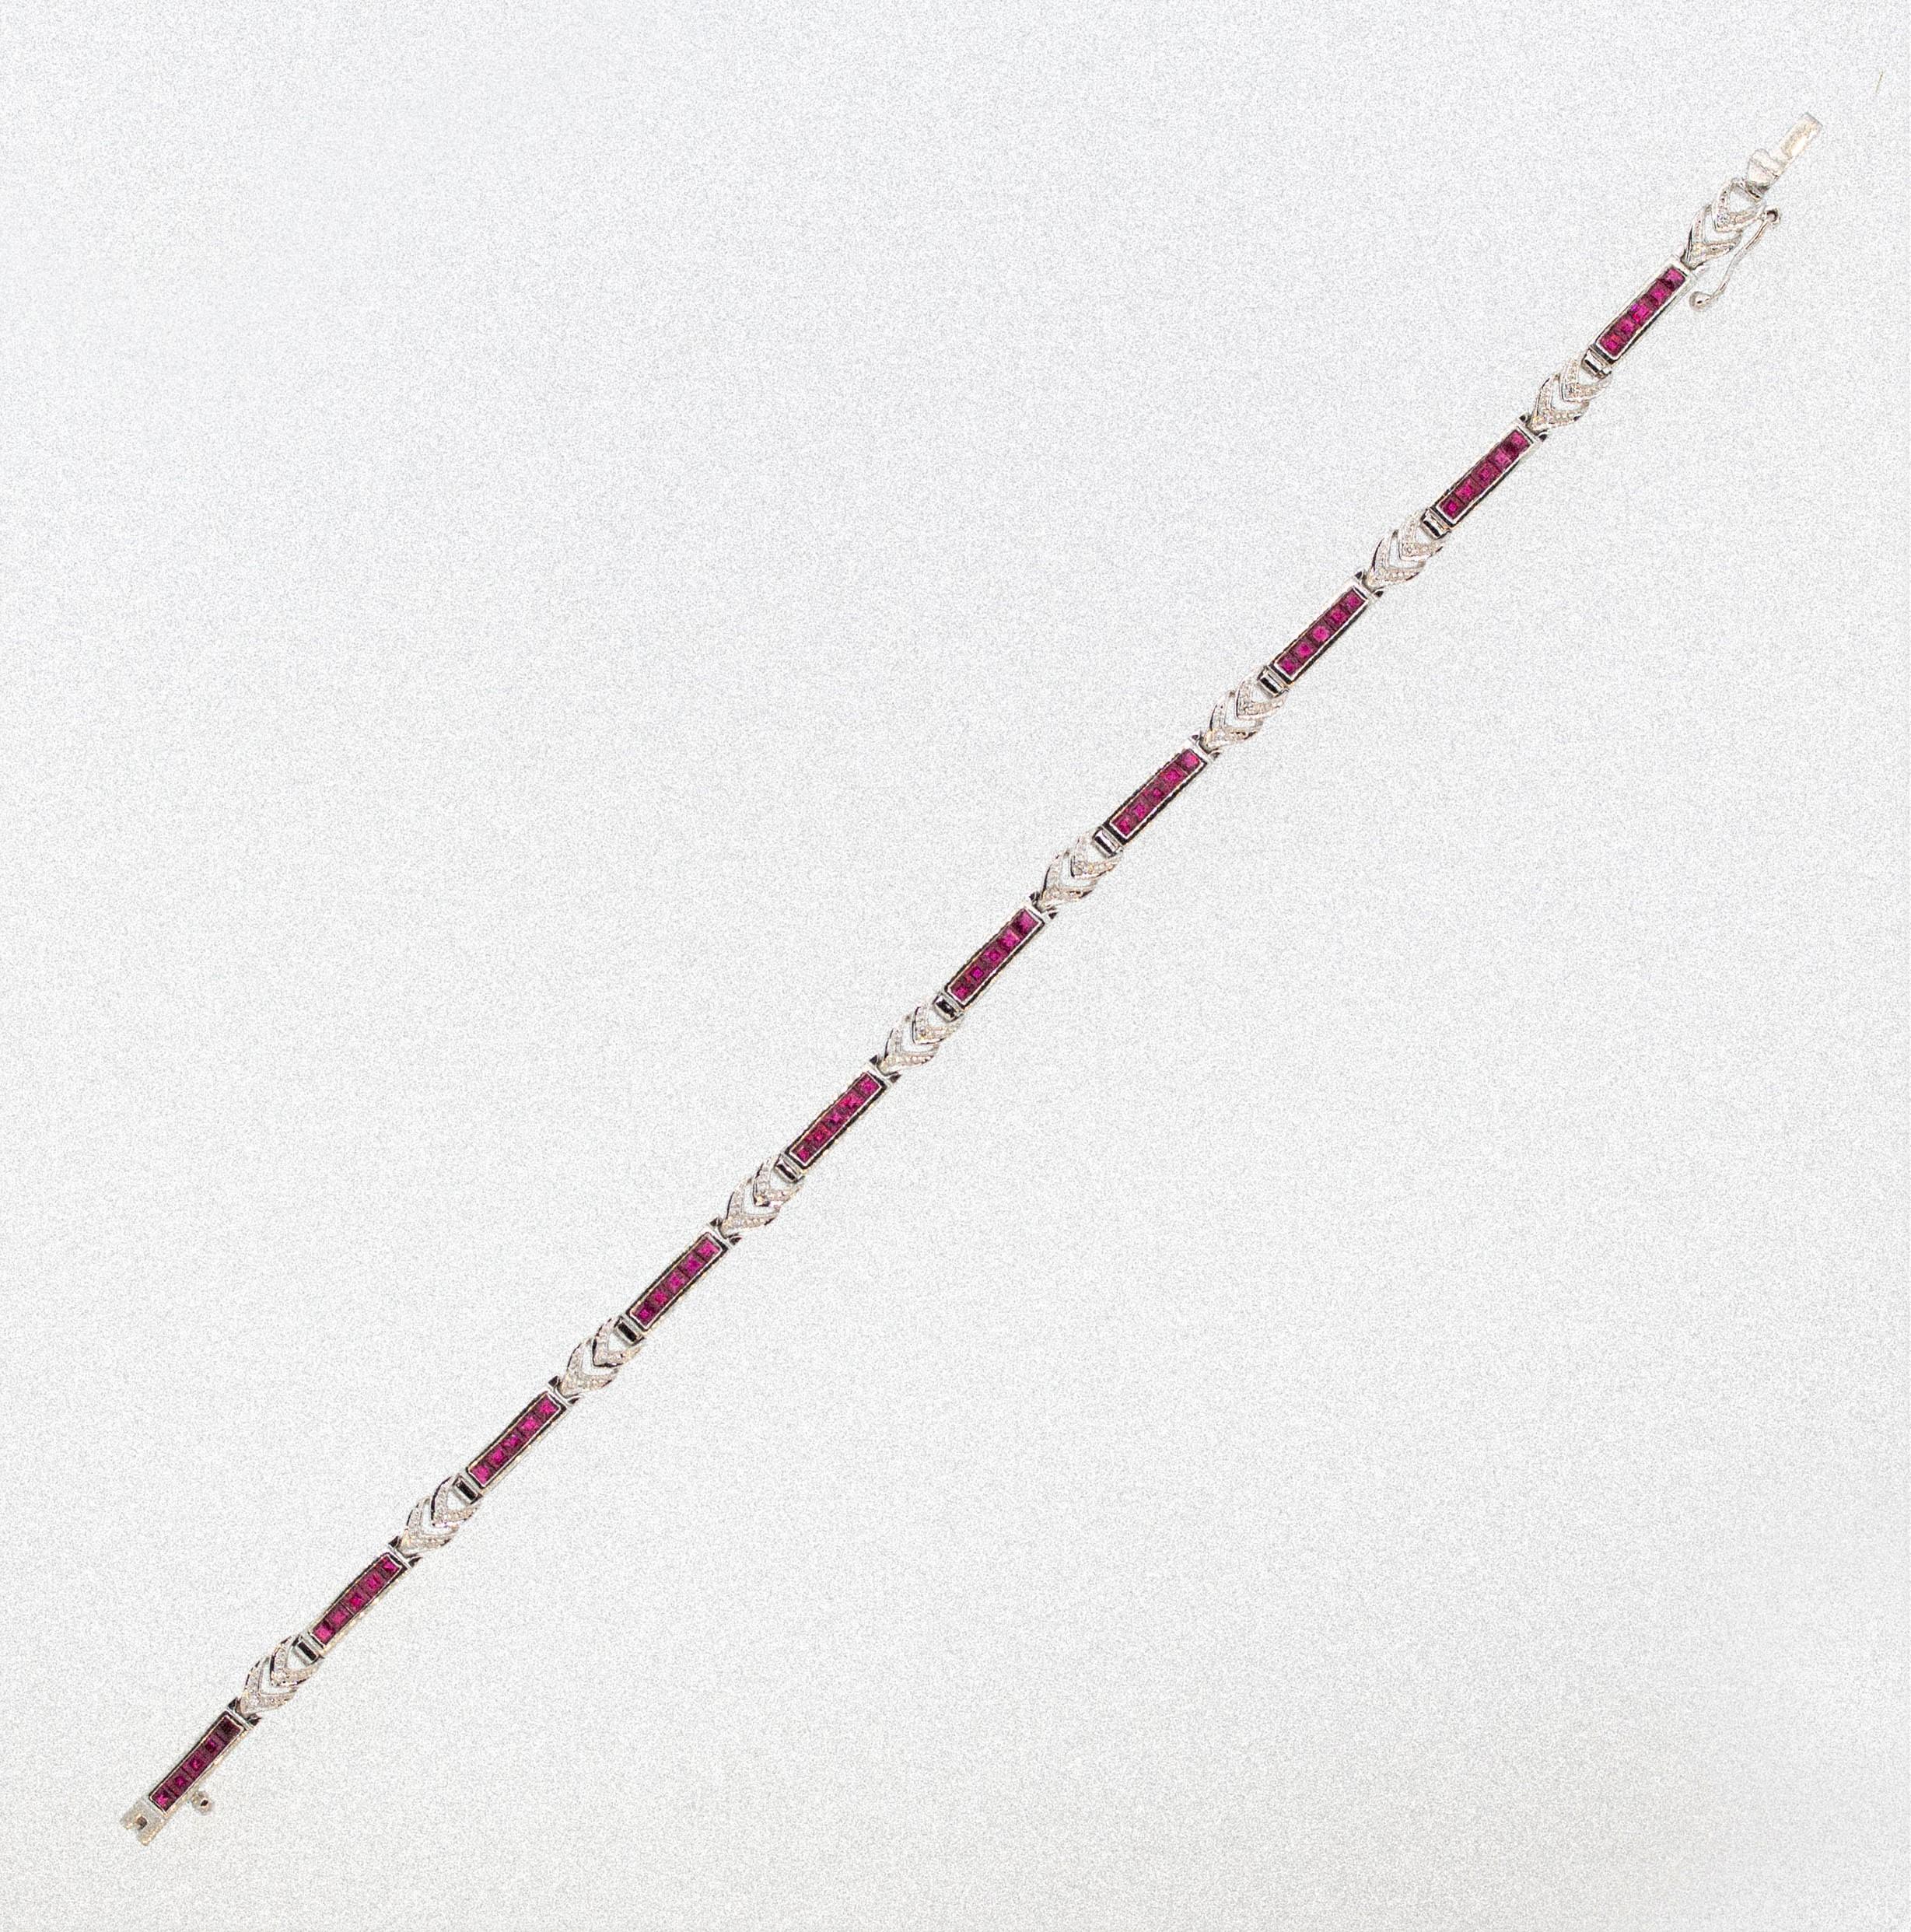 A sweet bracelet featuring 3.27 carats of calibre cut rubies which are channel set. They are accented by 0.11 carats of round cut diamonds set in gold arrows between the sets of rubies. Made in 18k white gold.

Length: 7.5 inches